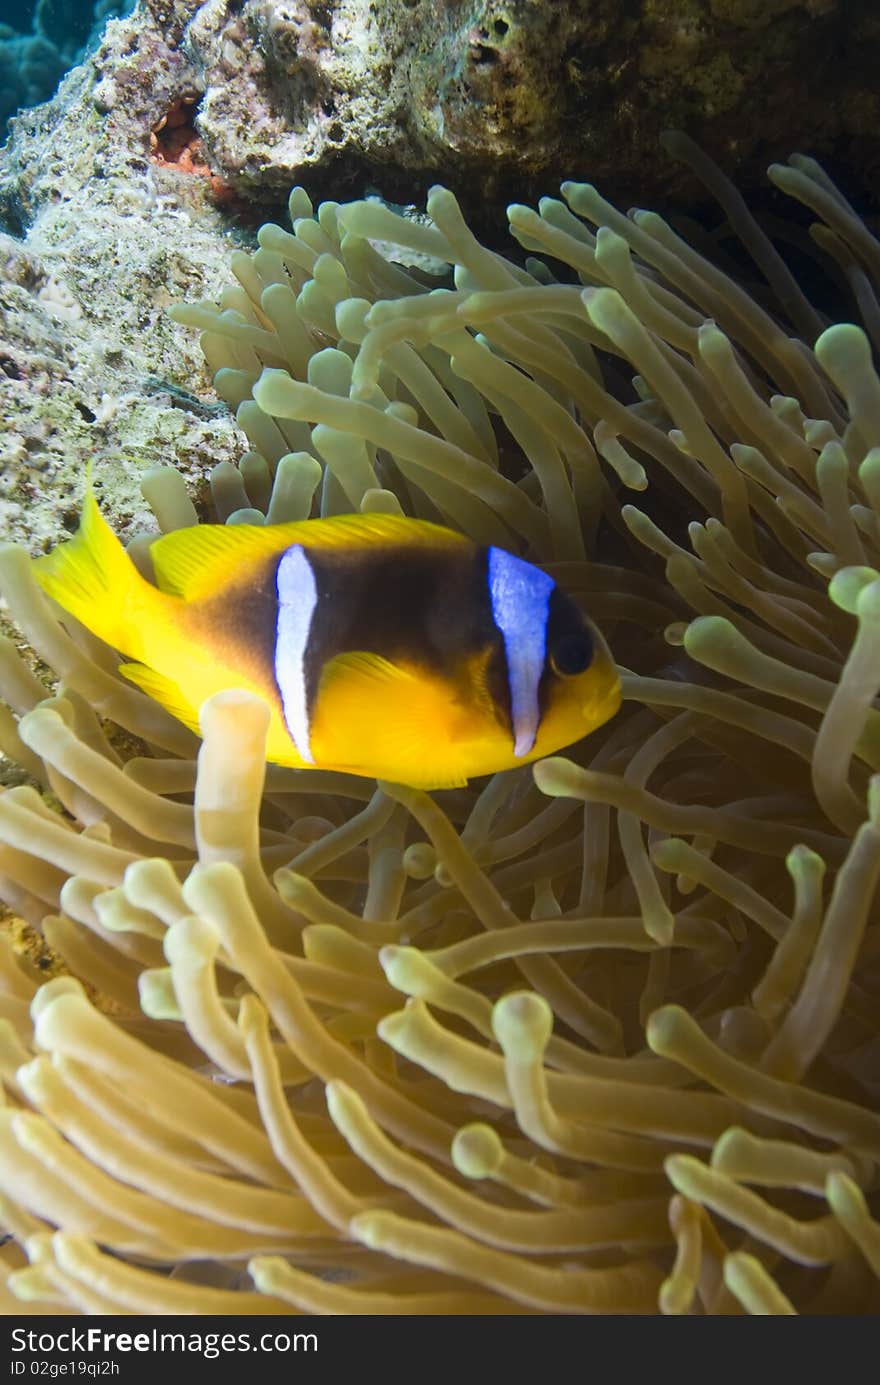 Red sea anemone fish (amphiprion bicinctus) close to  the protection of a Bubble anemone (entacmaea quadricolor). Red Sea, Egypt.